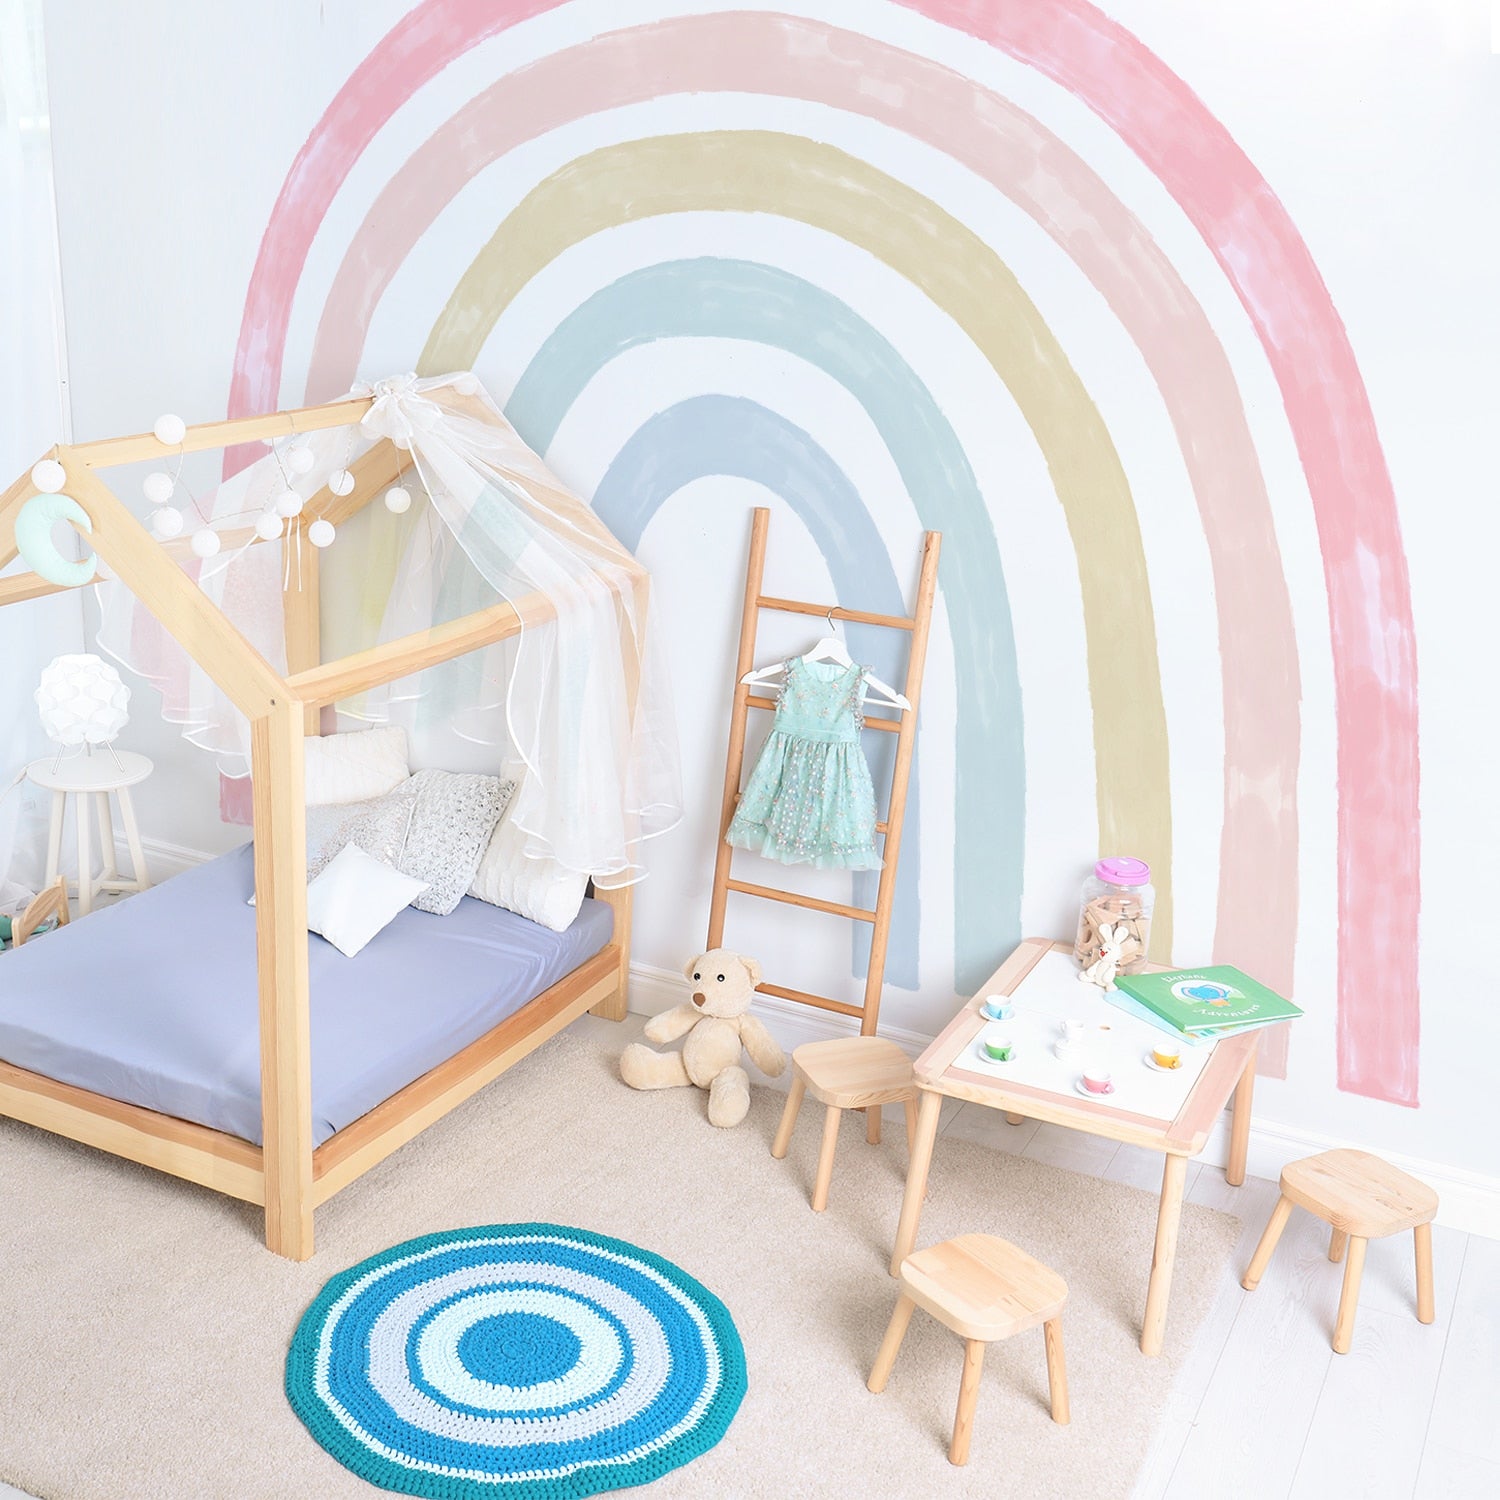 Pink Large Watercolor Rainbow Peel and Stick Vinyl Wall Sticker